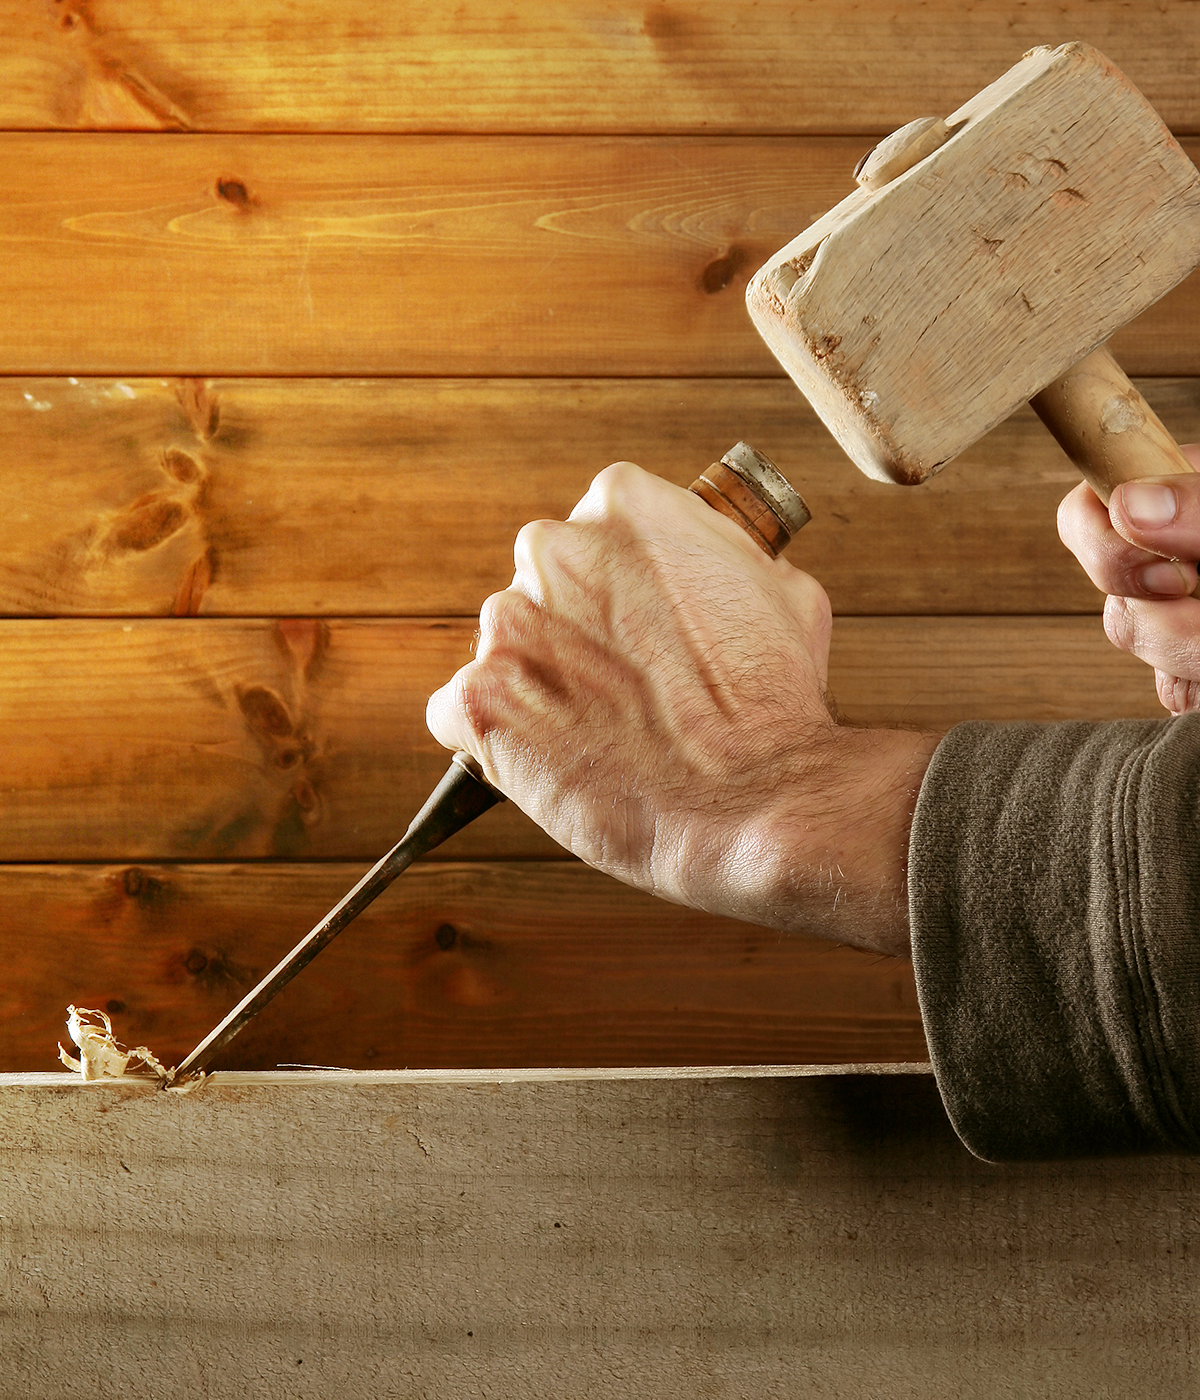 Image showing a person's hands using a mallet and chisel on wood